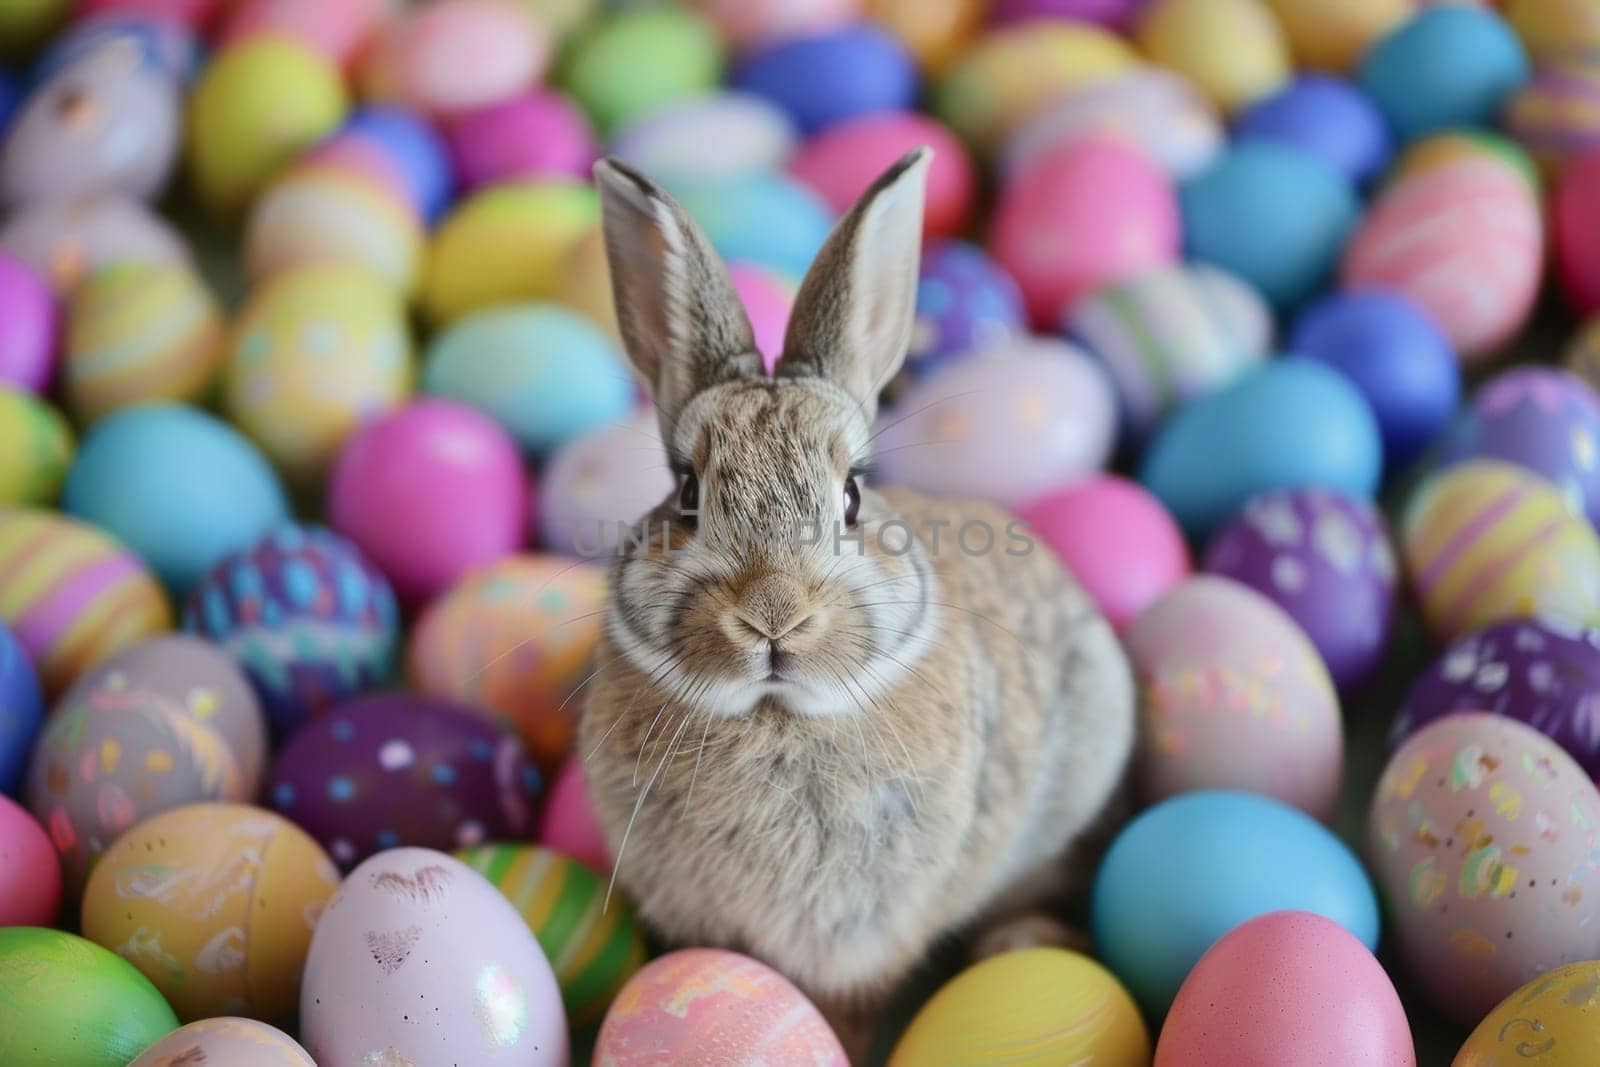 A rabbit is standing in a pile of colorful Easter eggs by nateemee